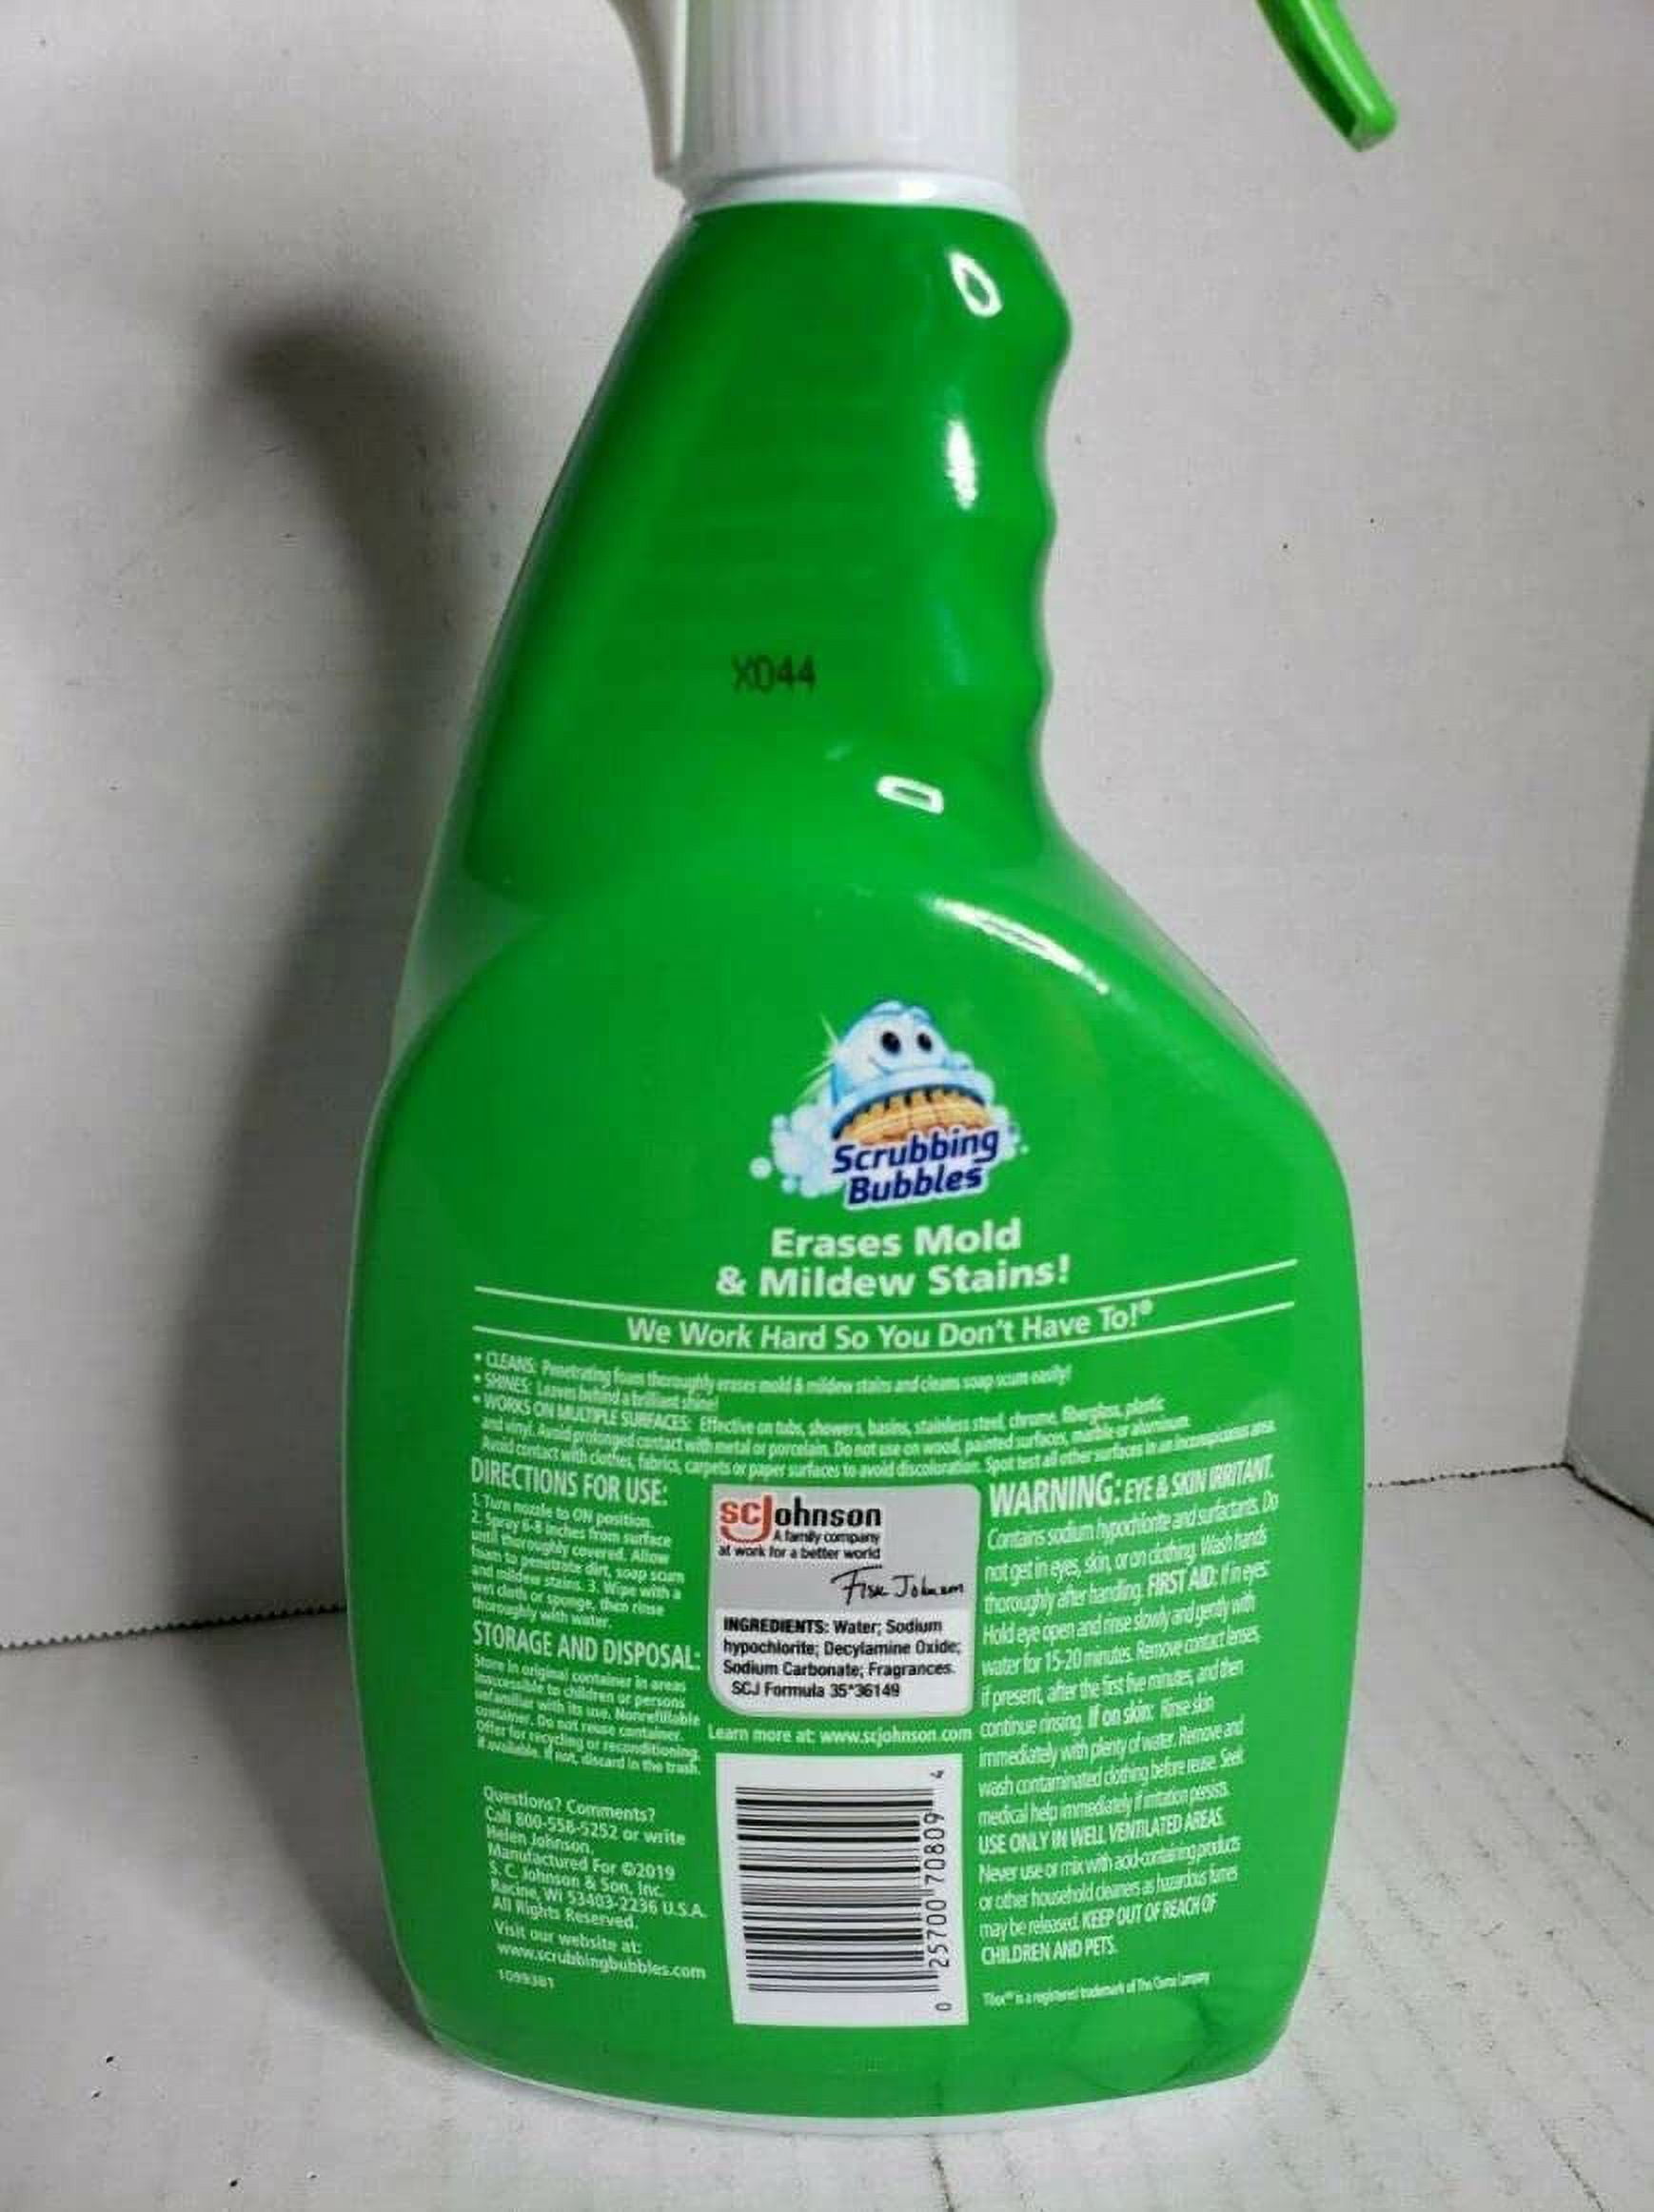 Buy Mean Green 73008 Foaming Bathroom Cleaner with Bleach, 32 oz, Liquid,  Solvent-Like, Colorless Colorless